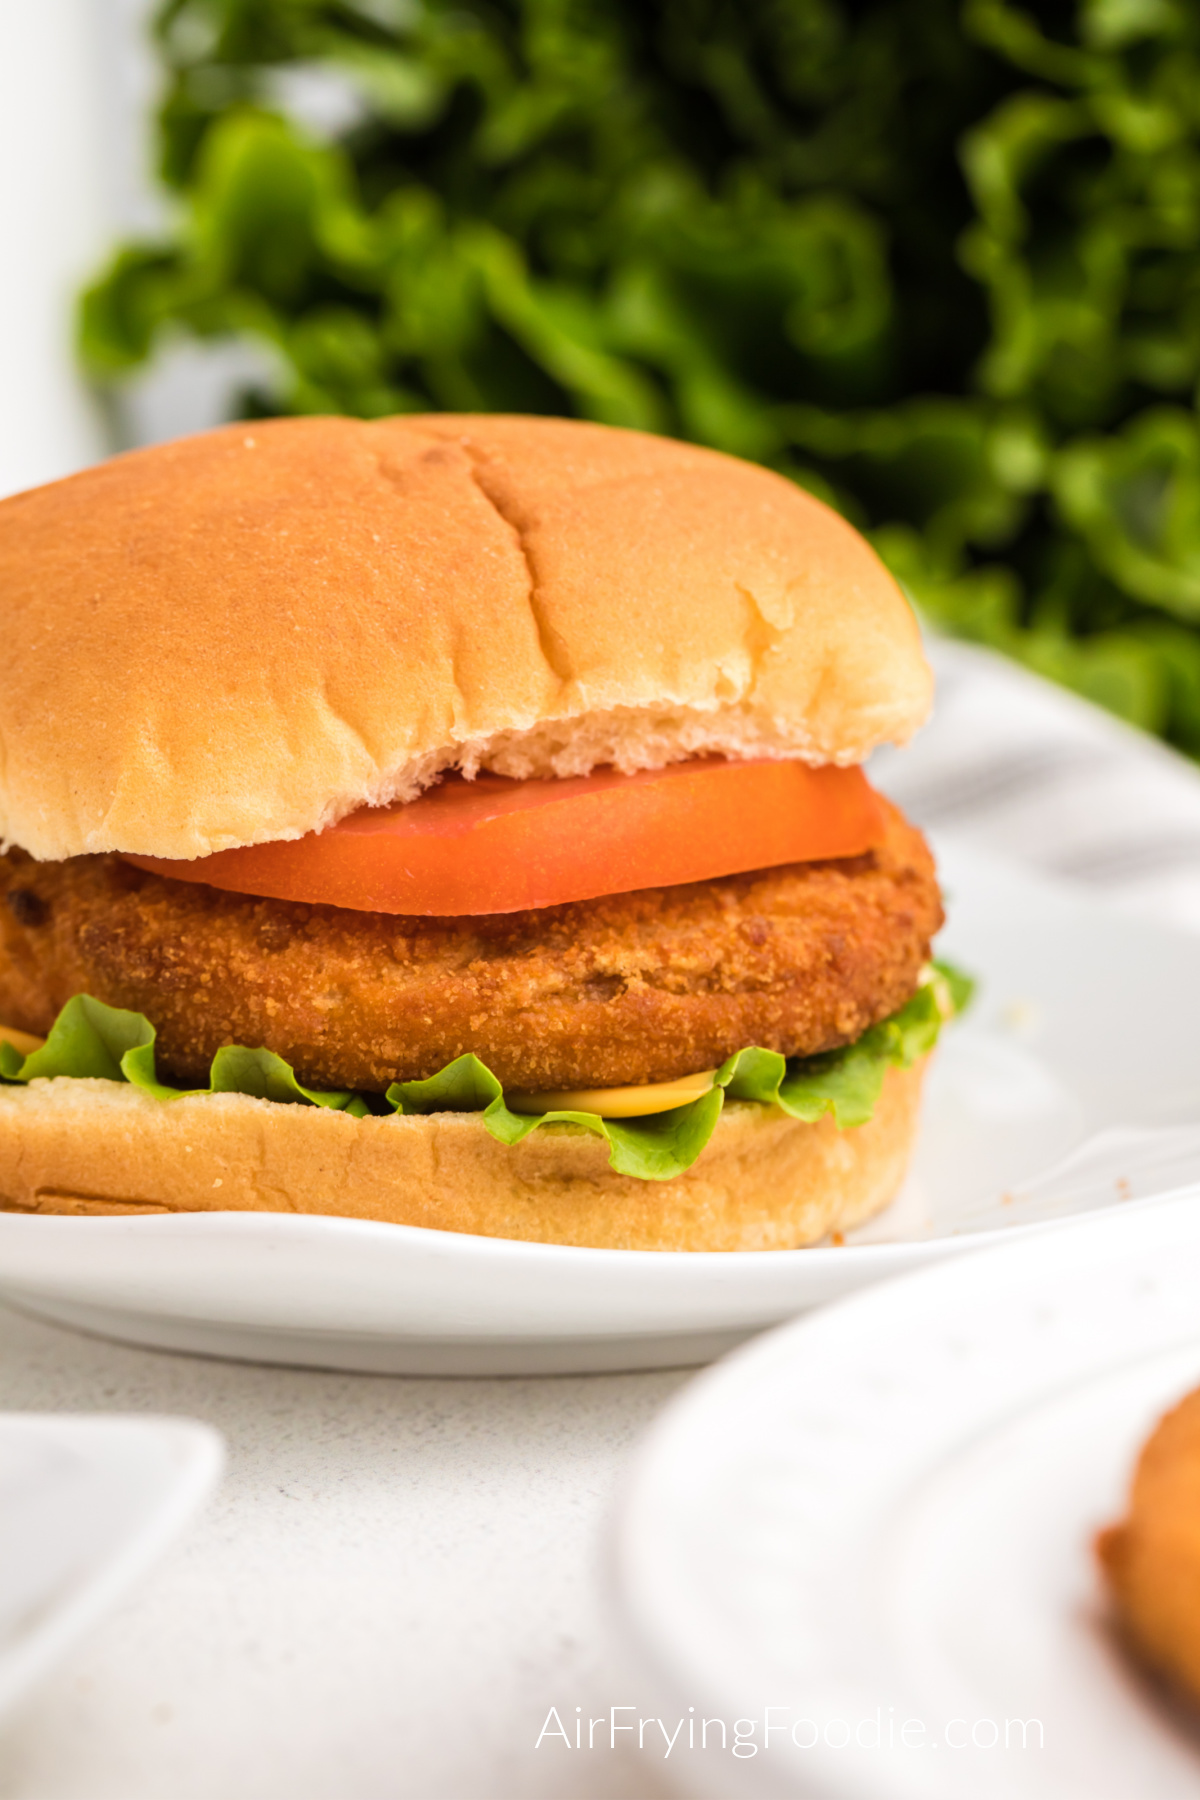 Tyson frozen chicken patties are fully cooked and on a bun, ready to serve.